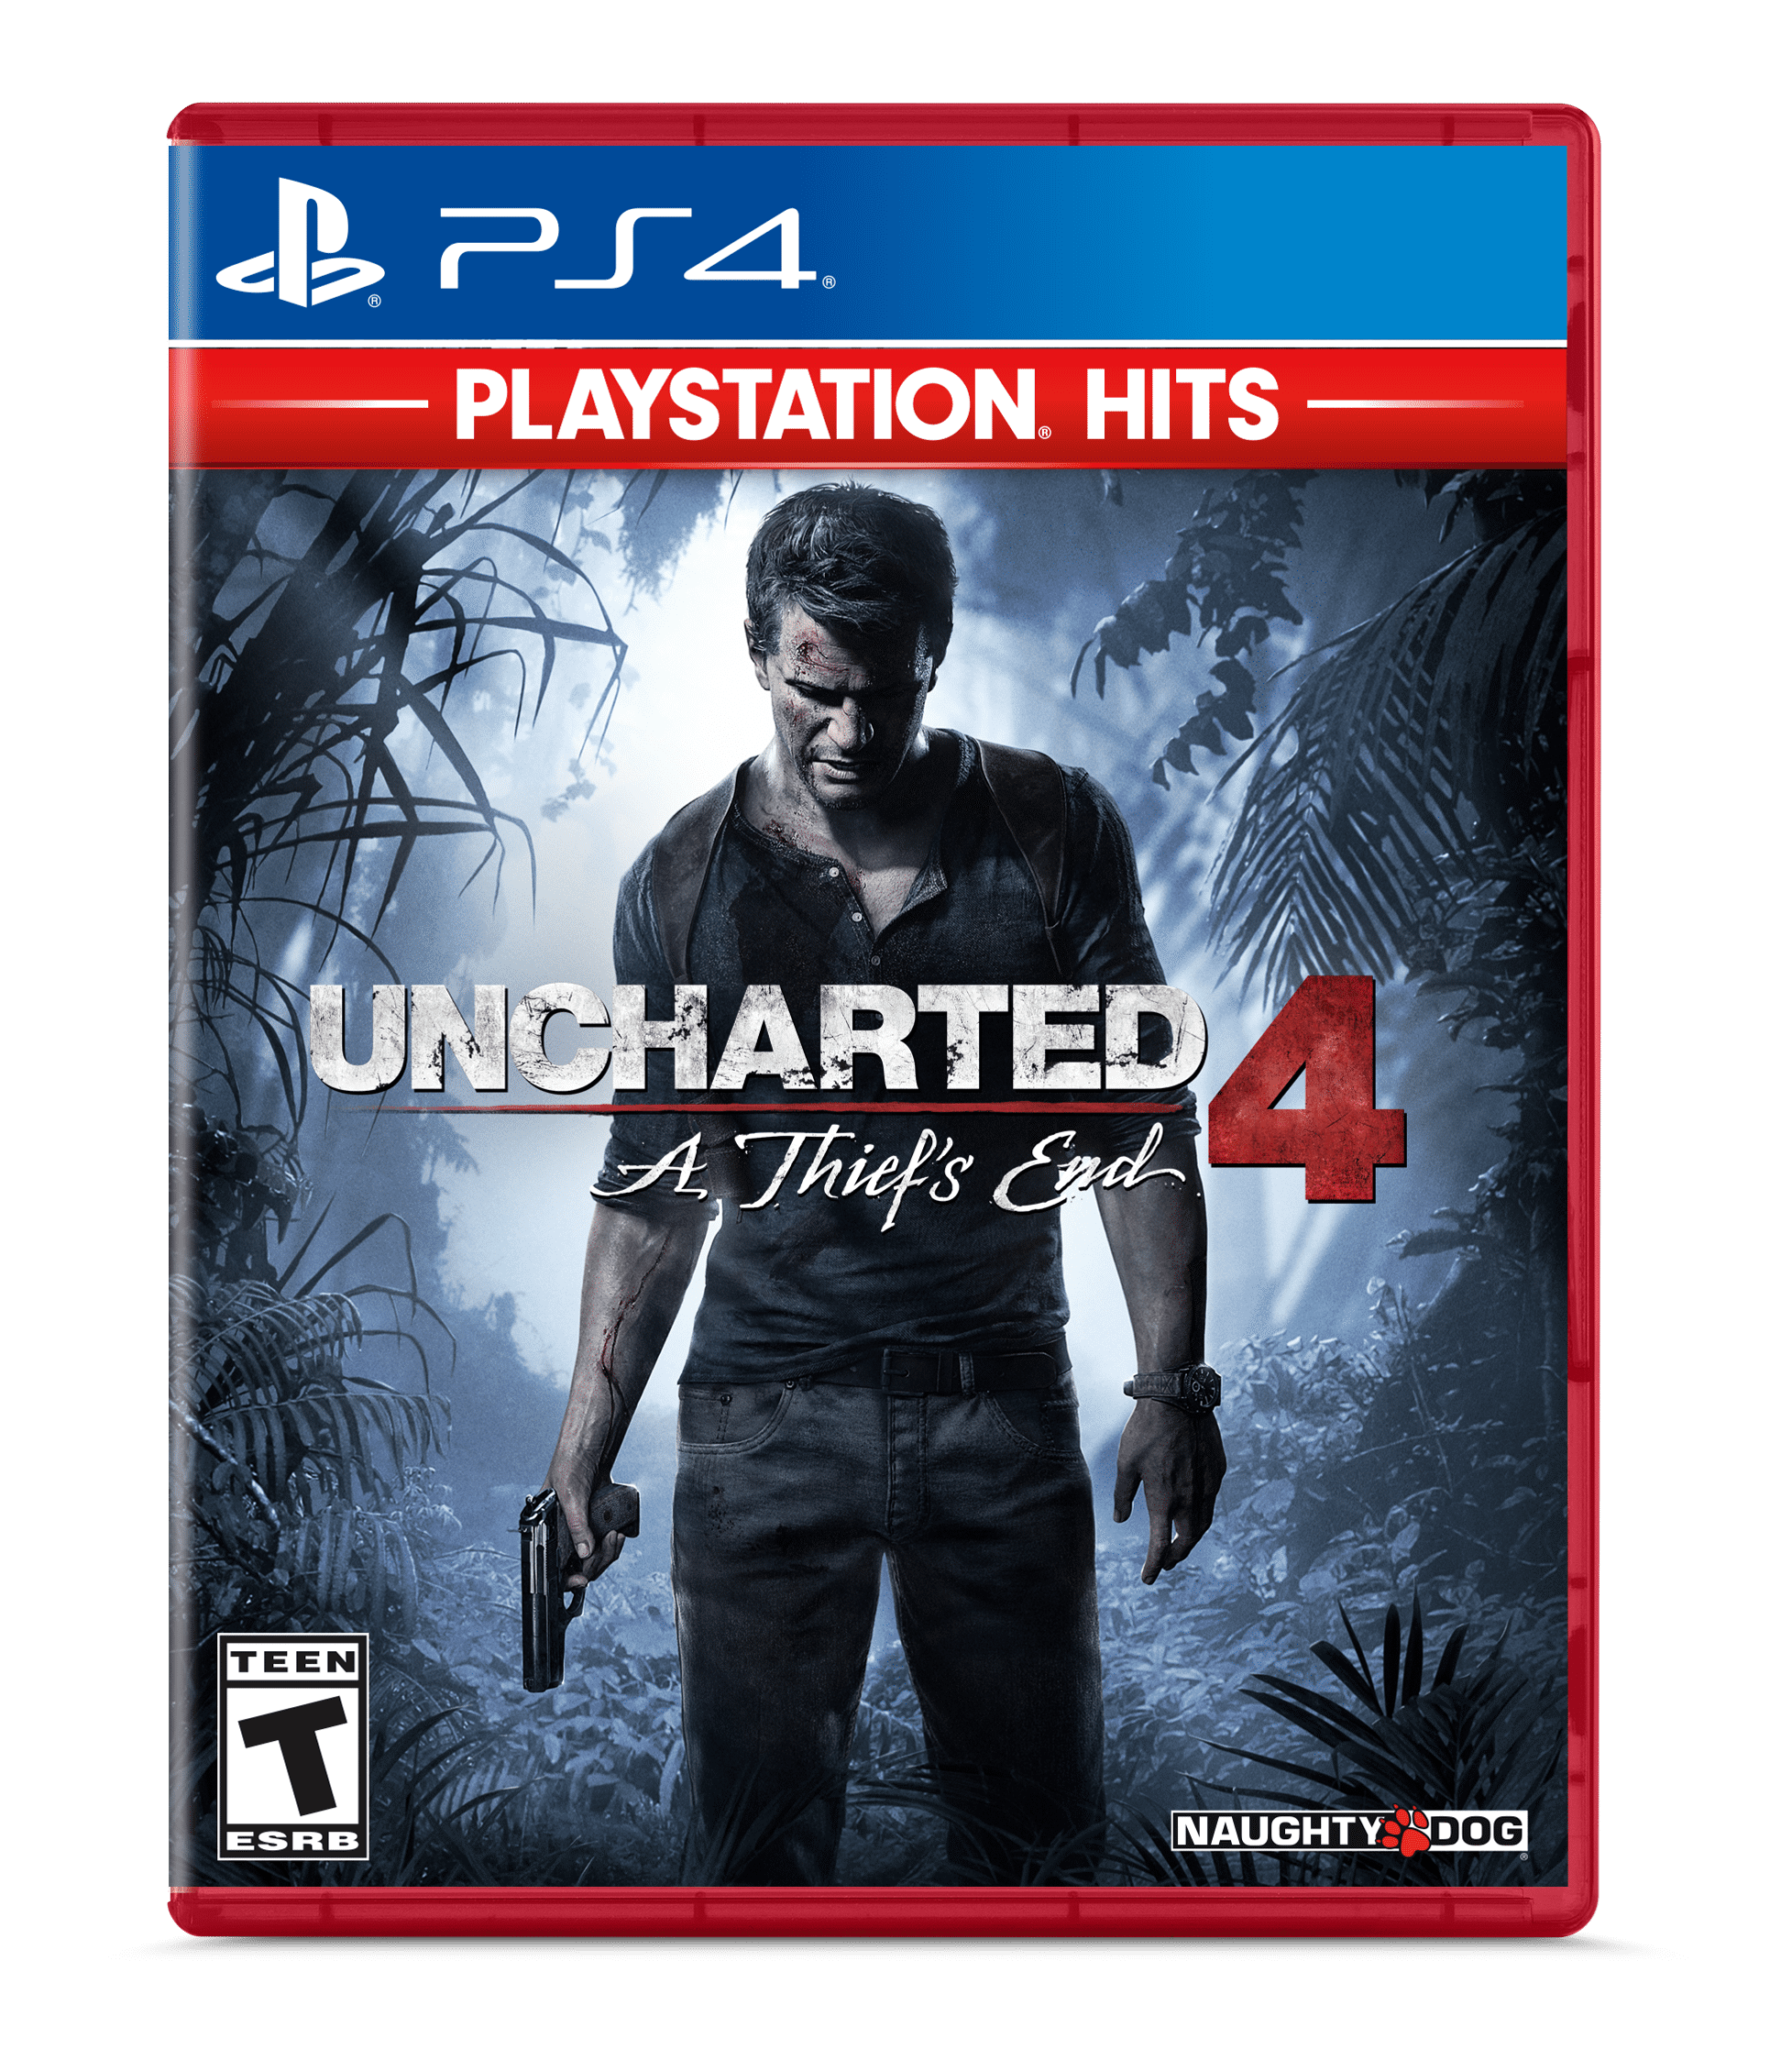 Uncharted 4: A End - PlayStation Hits, Sony, PlayStation 4, 711719523215 - Walmart.com